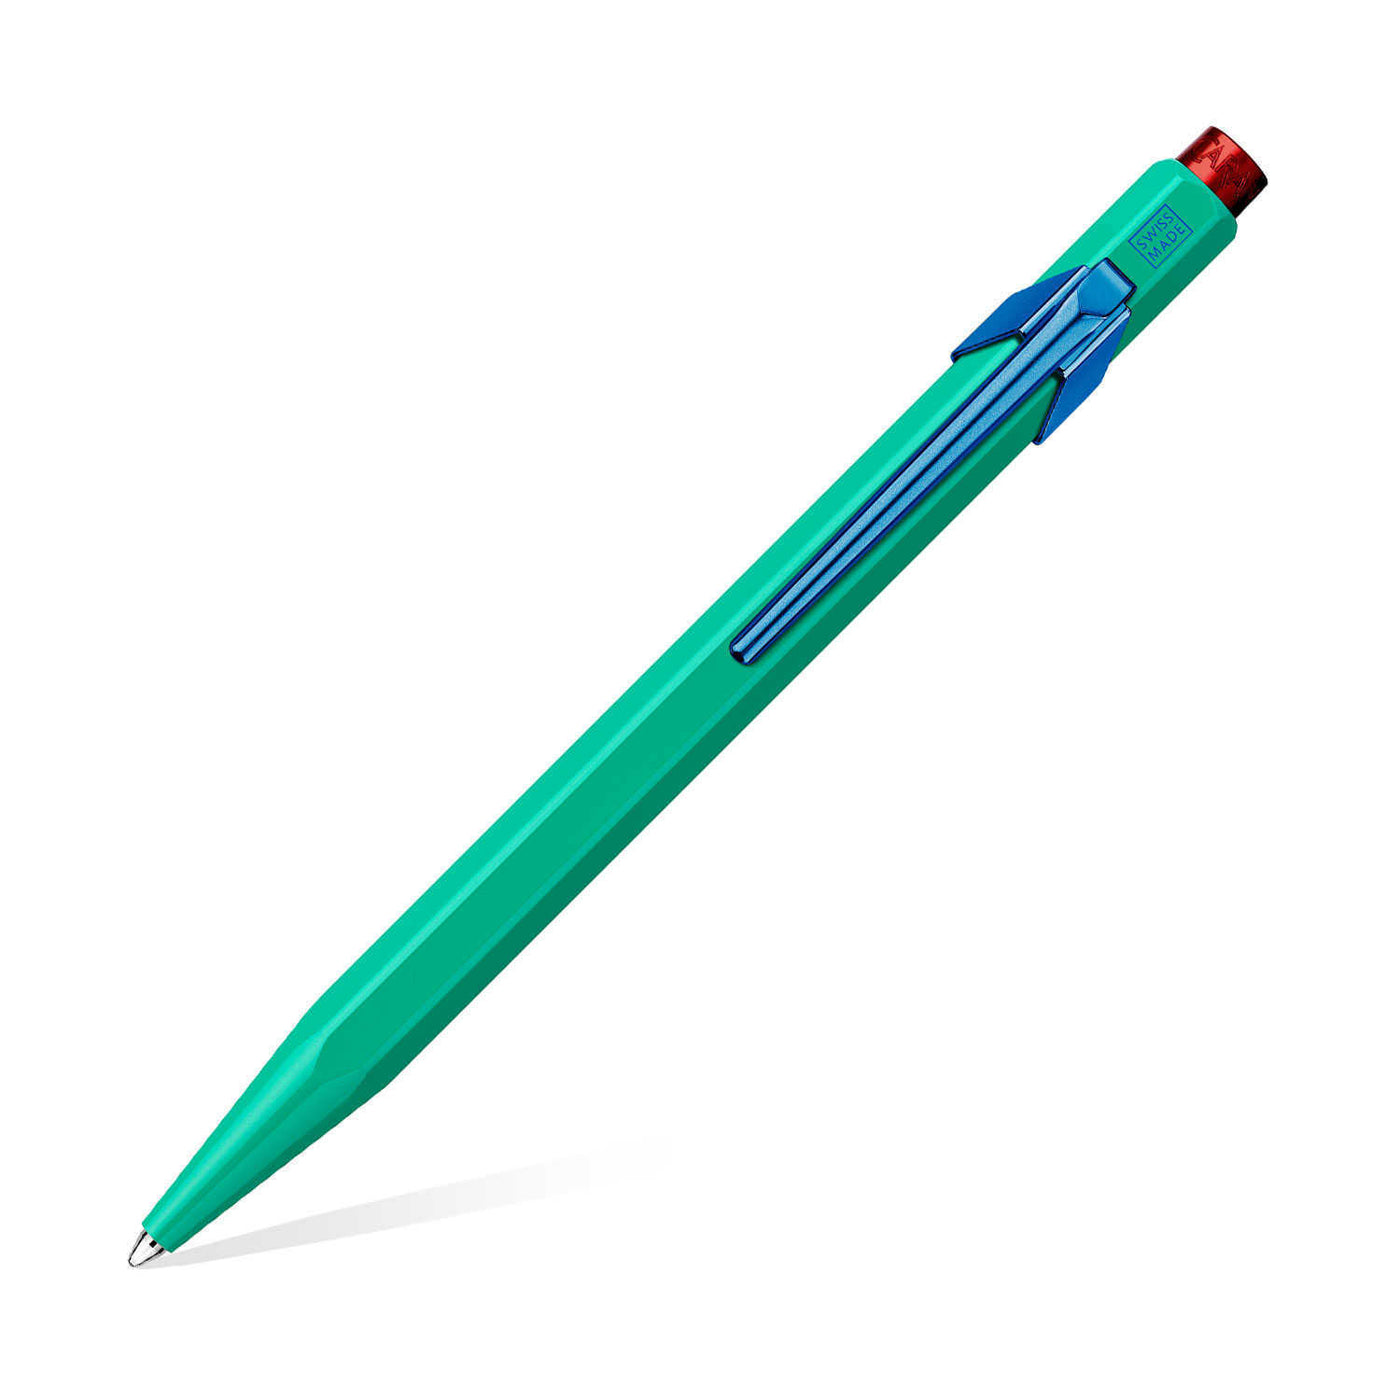 Caran d'Ache 849 Claim Your Style Ball Pen - Veronese Green (Limited Edition) 1